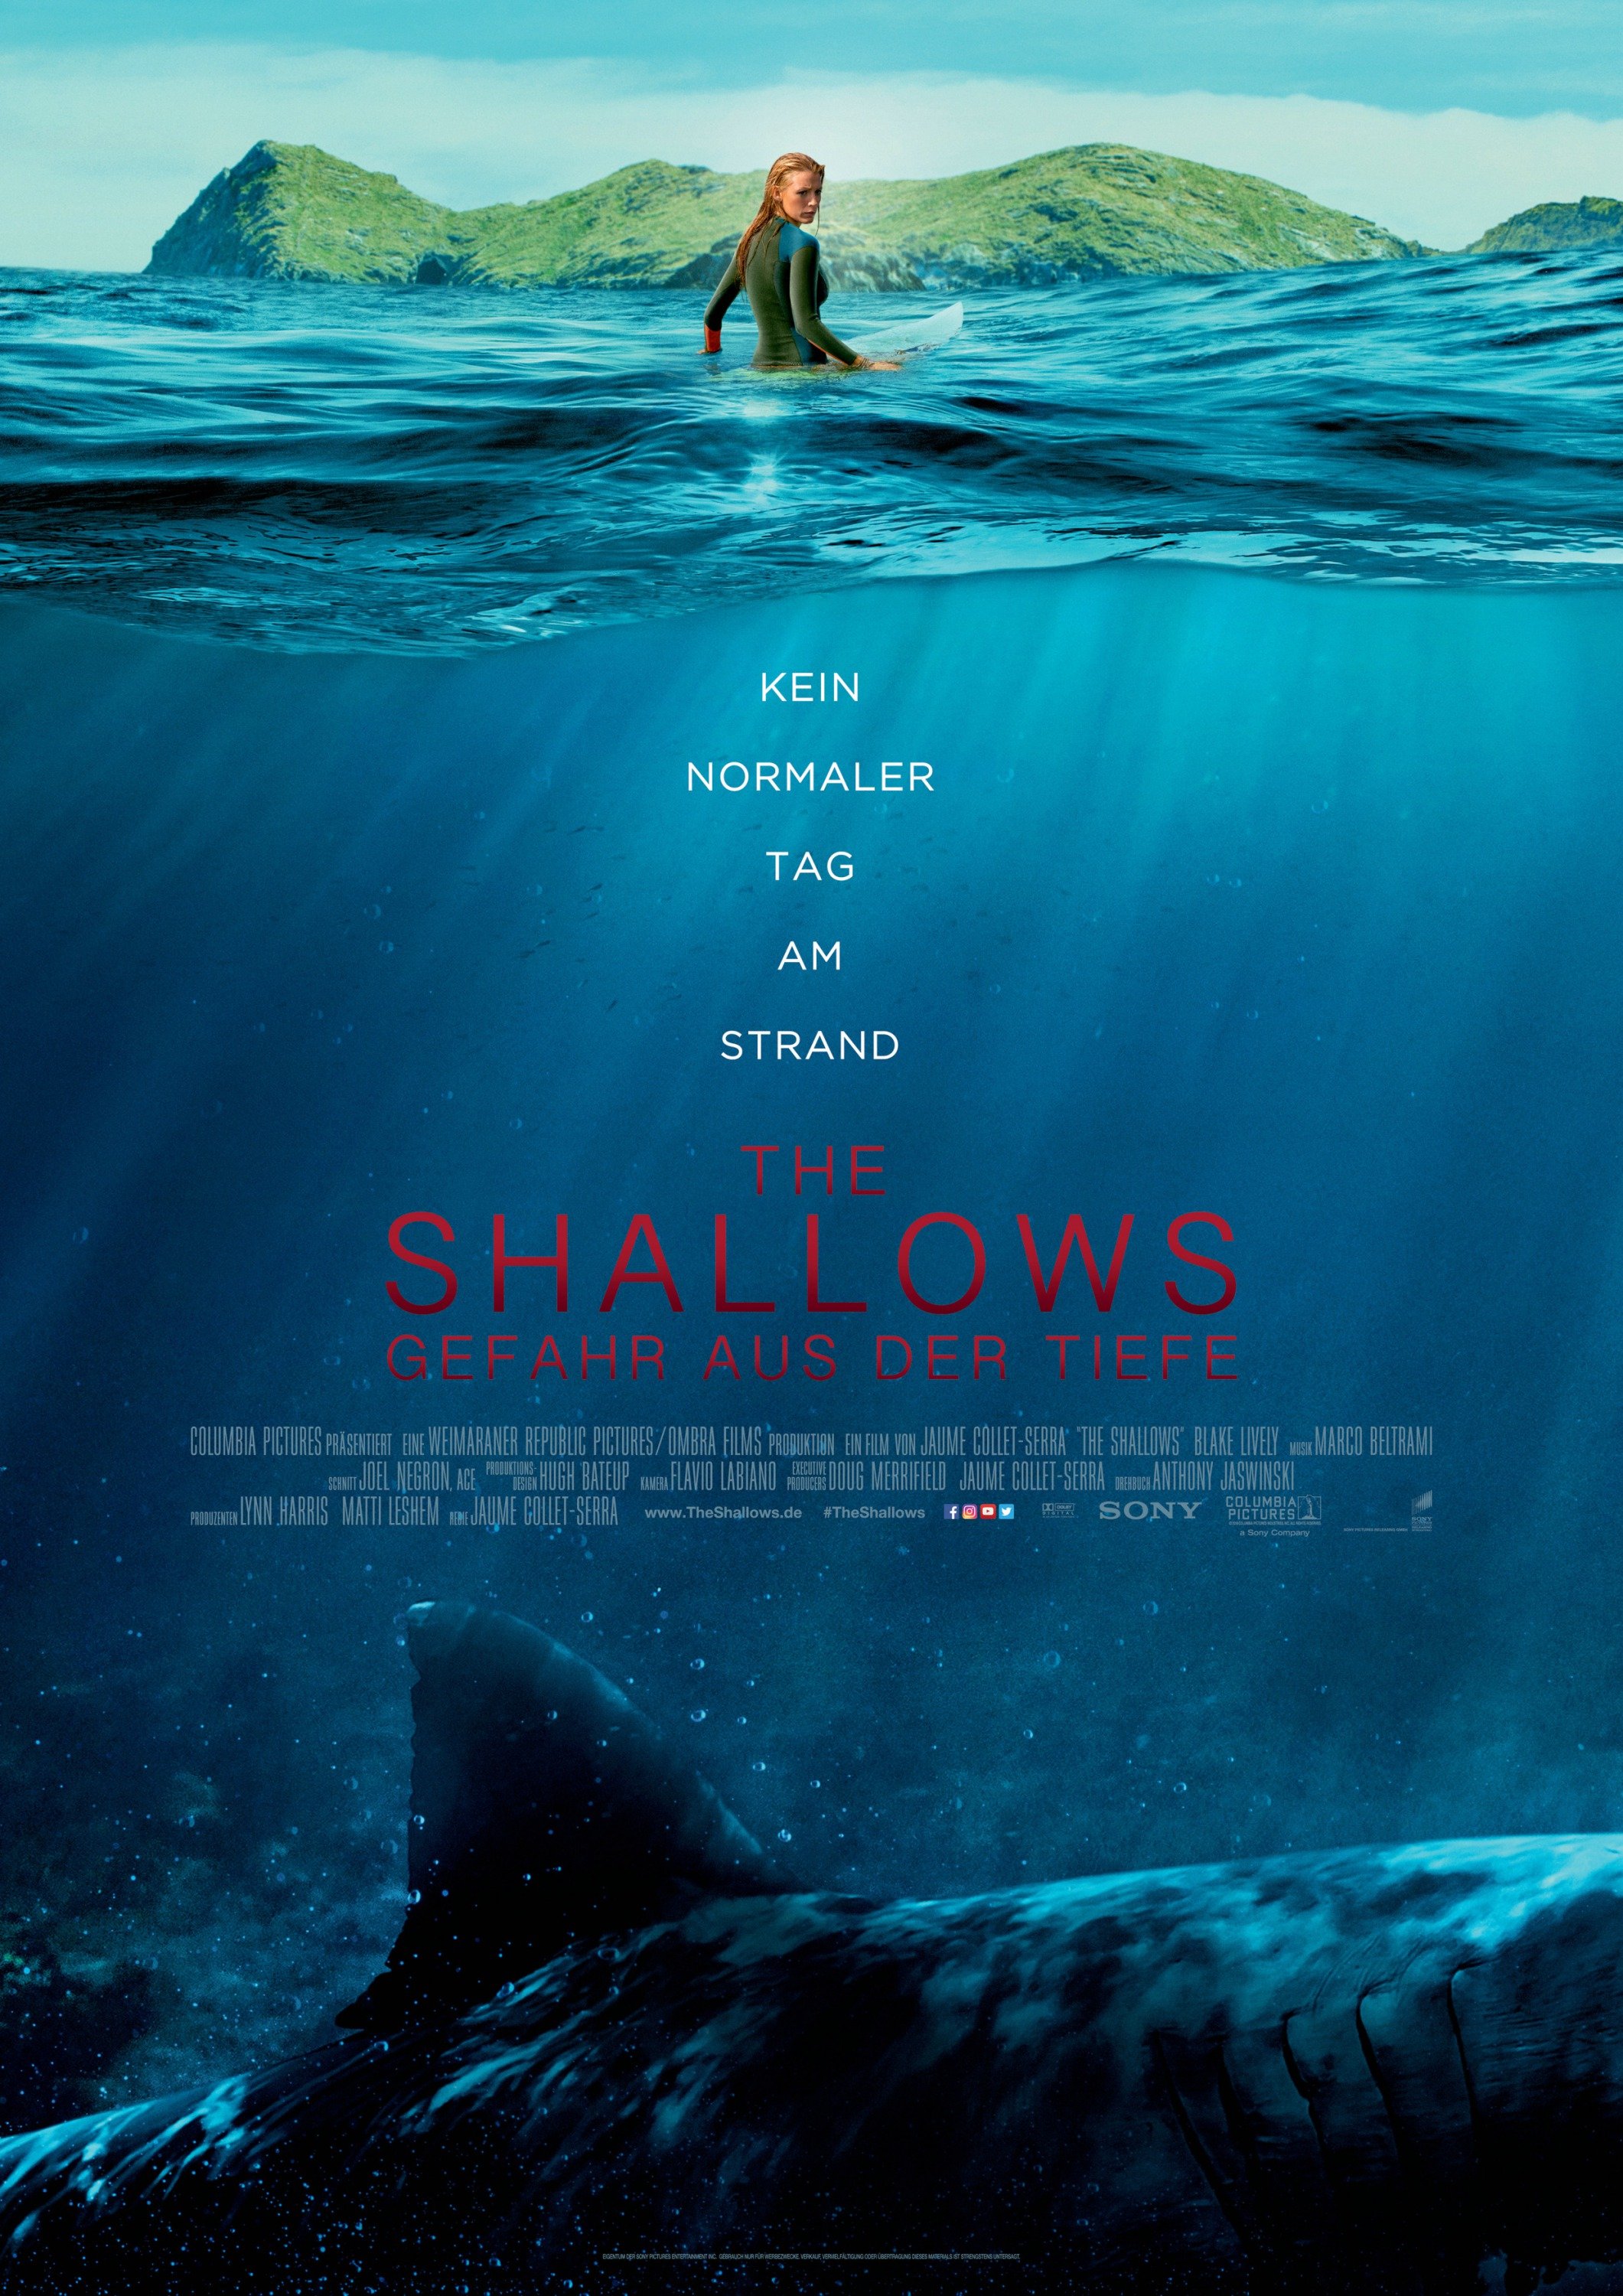 The Shallows 2016 wallpaper 2018 in Movies